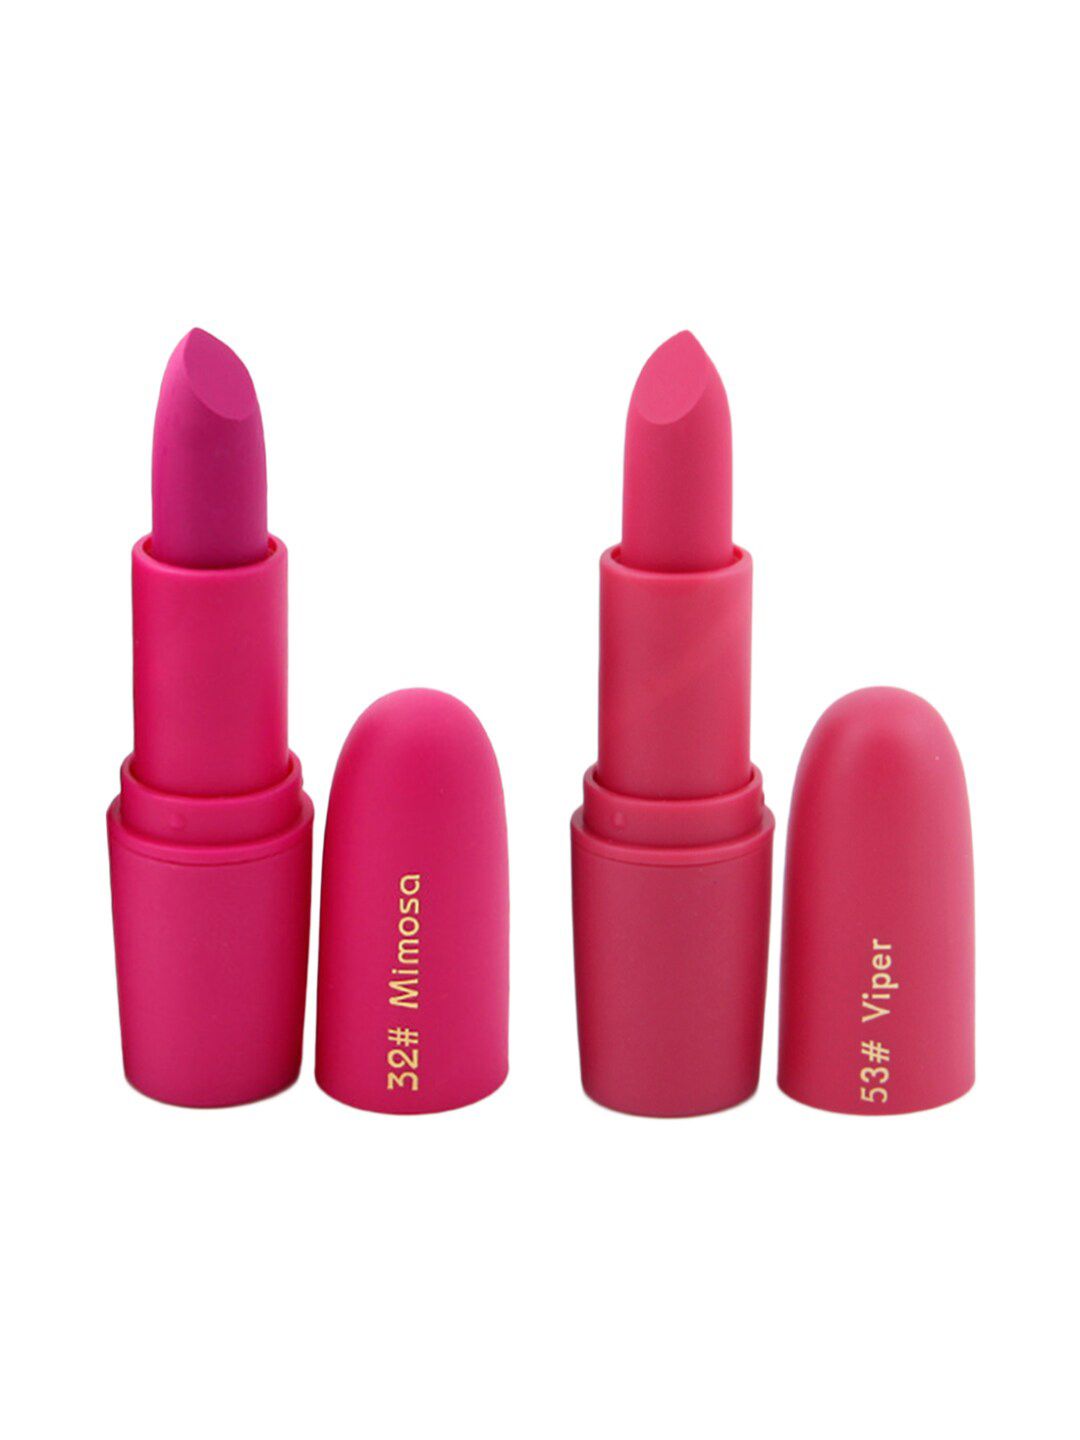 MISS ROSE Professional Make-Up Set of 2 Matte Creamy Lipsticks - Mimosa 32 & Viper 53 Price in India